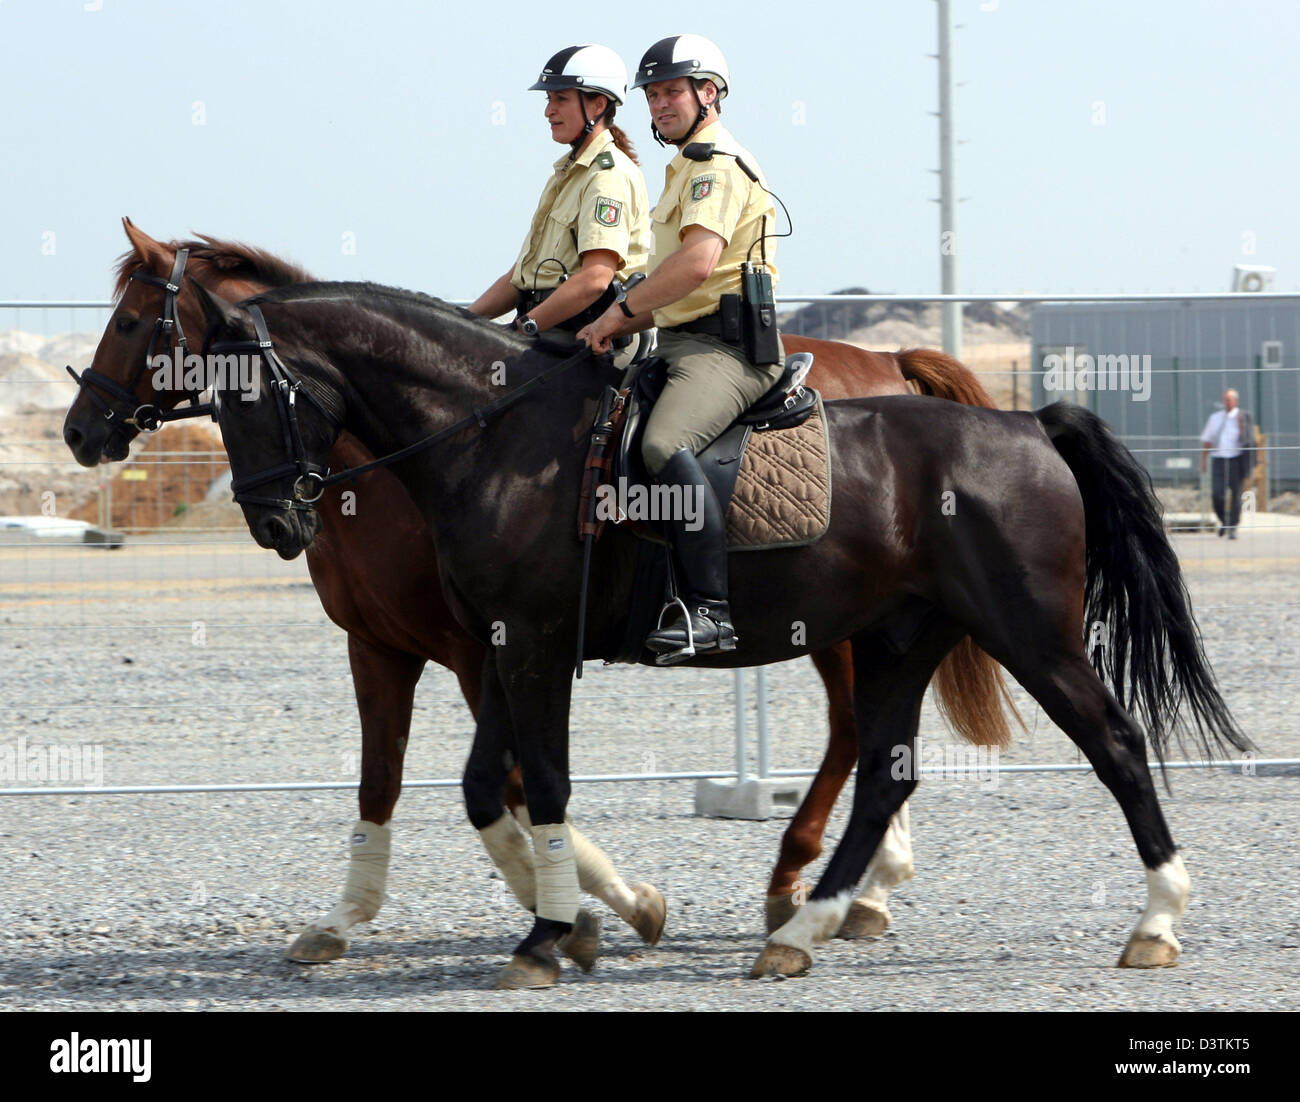 Mounted police officers pictured on the beat in Grevenbroich, Germany, 23 August 2006. The mounted police was axed in 2002 and reinstalled in 2006. Photo: Franz-Peter Tschauner Stock Photo